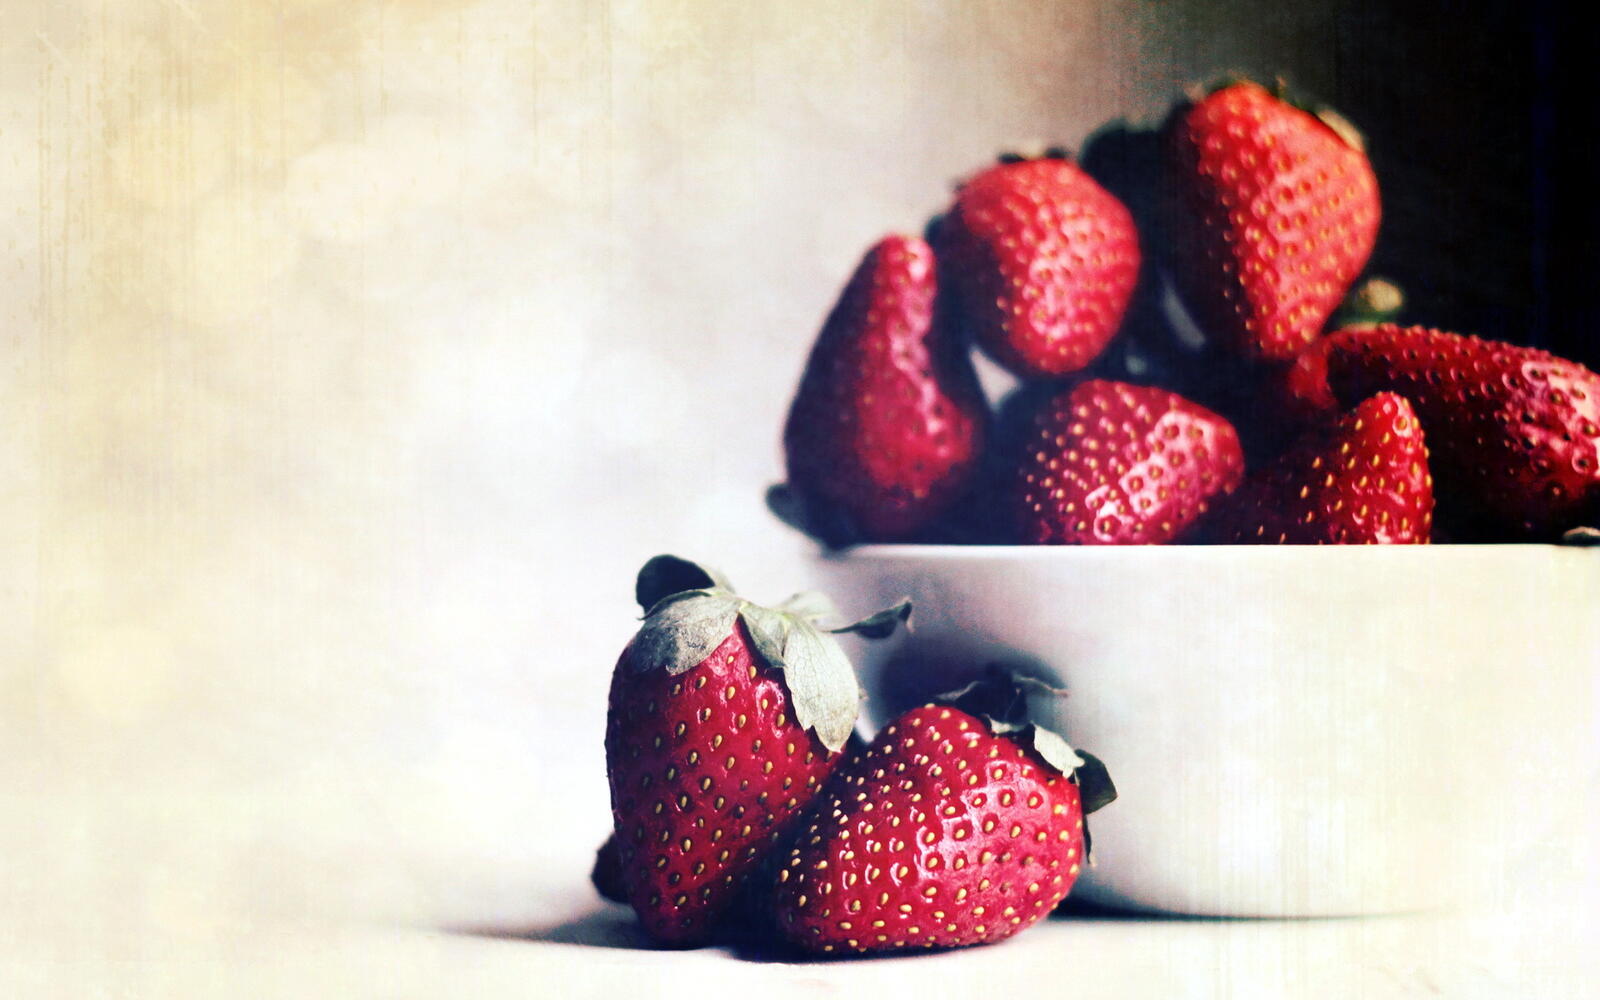 Wallpapers strawberry red plate on the desktop